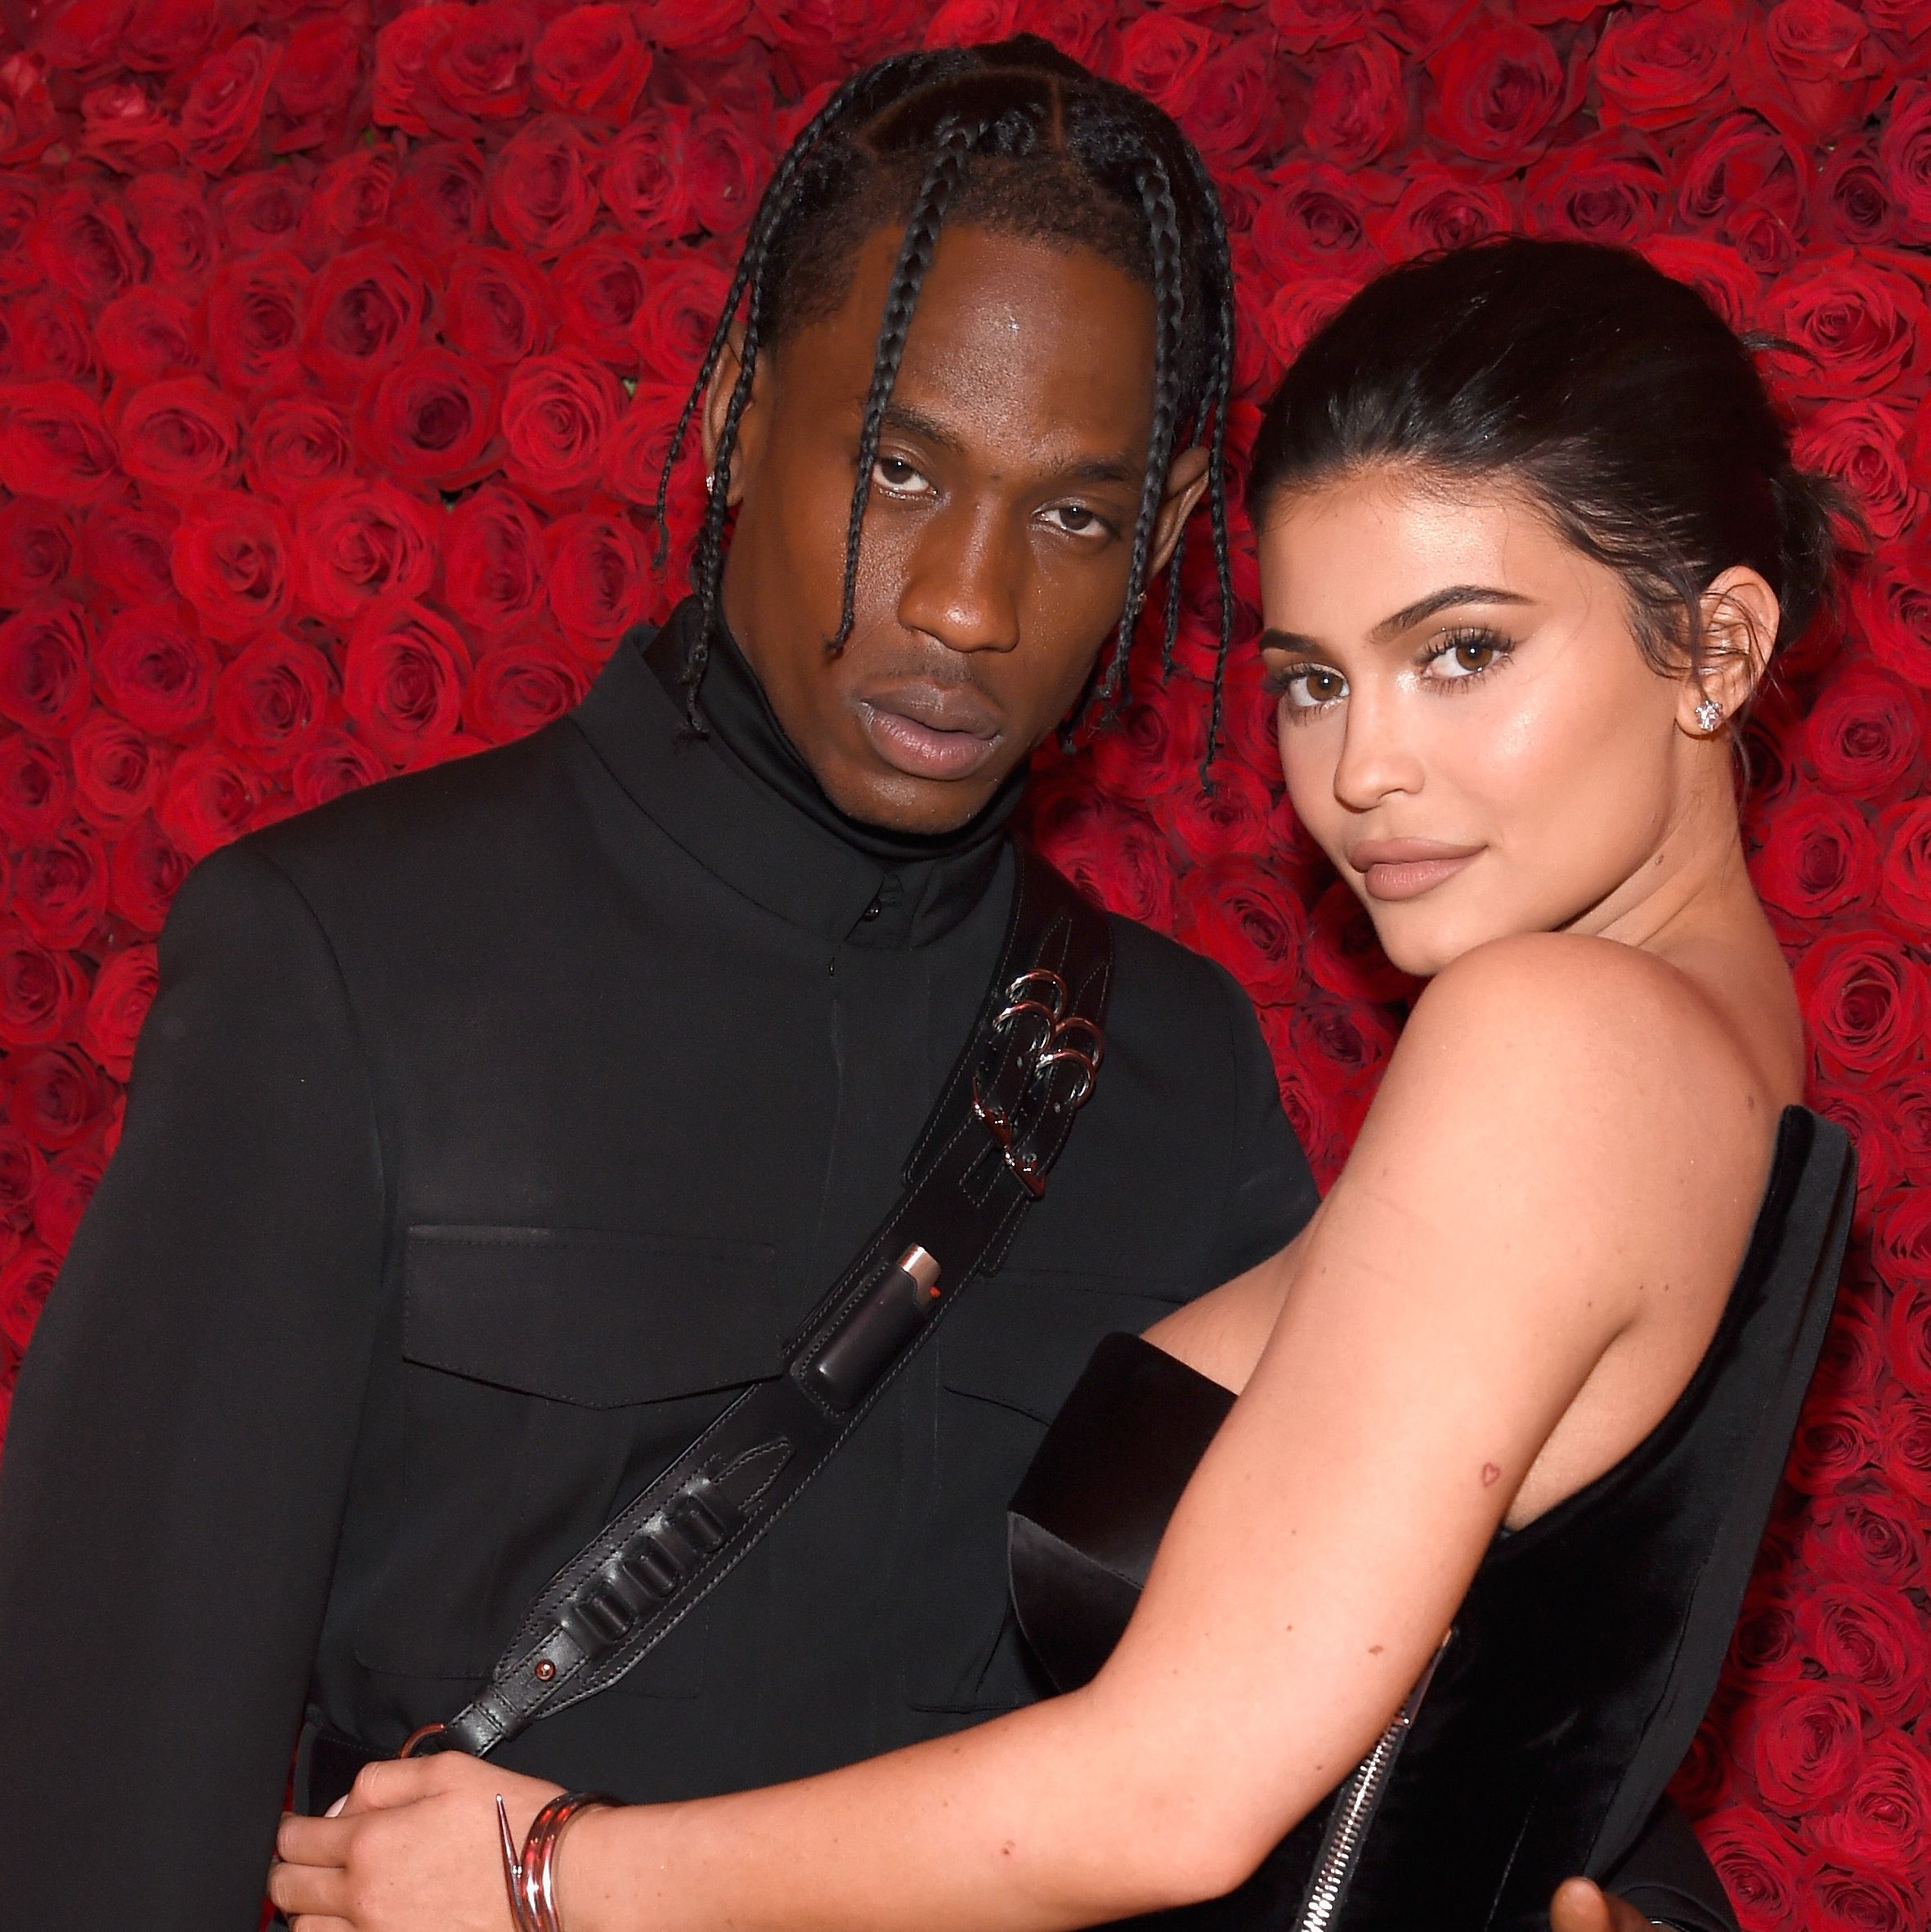 Kylie Jenner and Travis Scott's Relationship Has Changed in a 